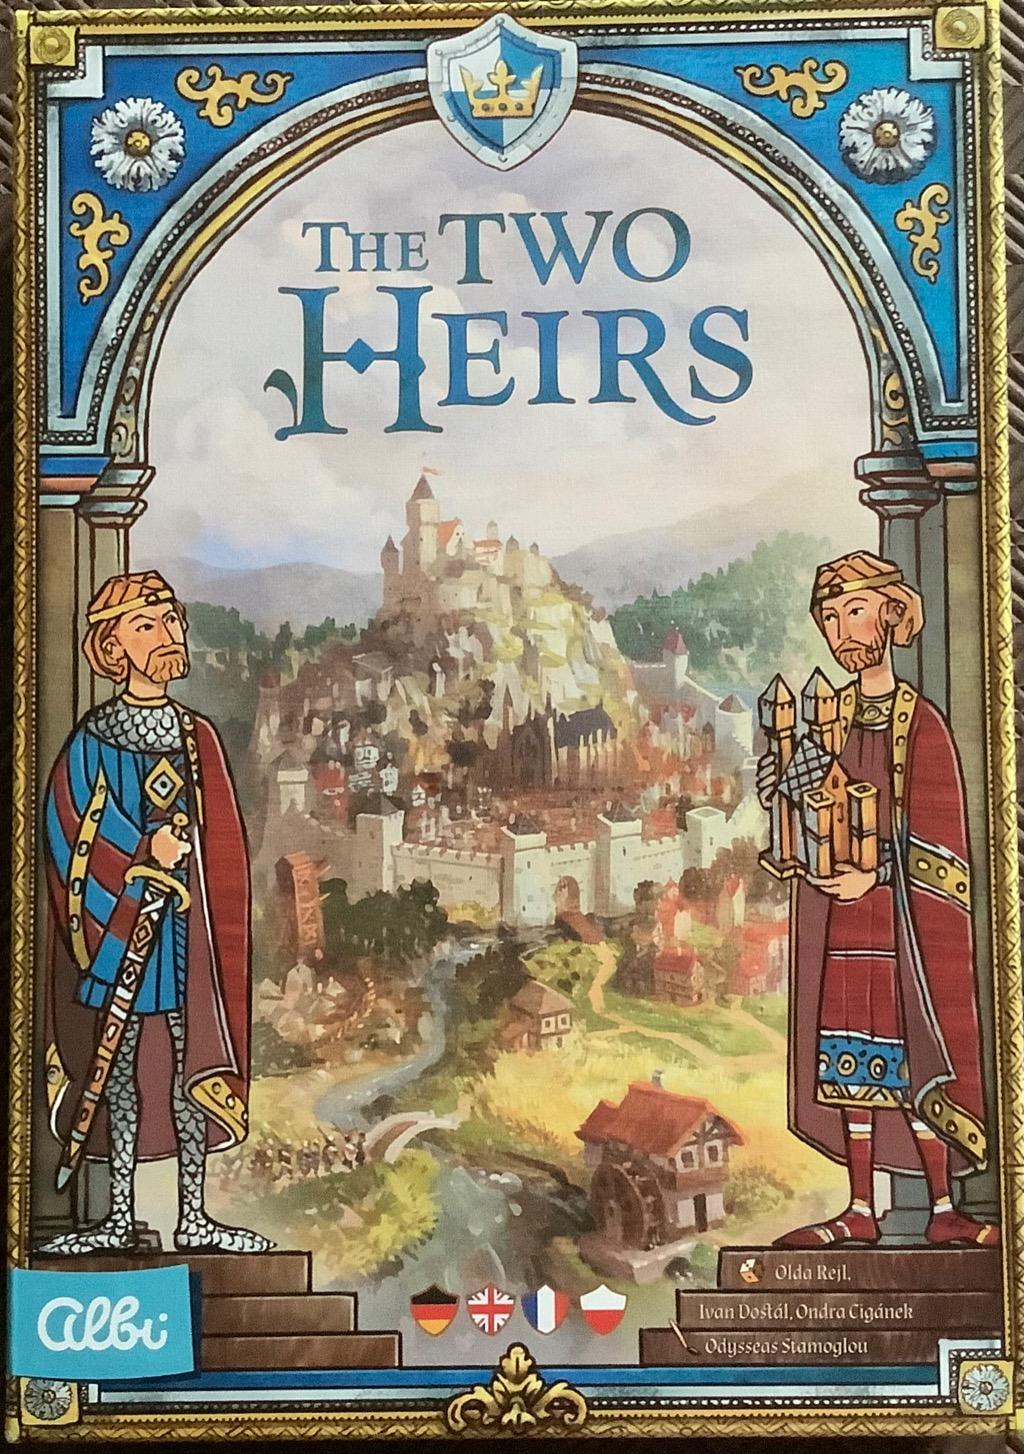 The Two Heirs